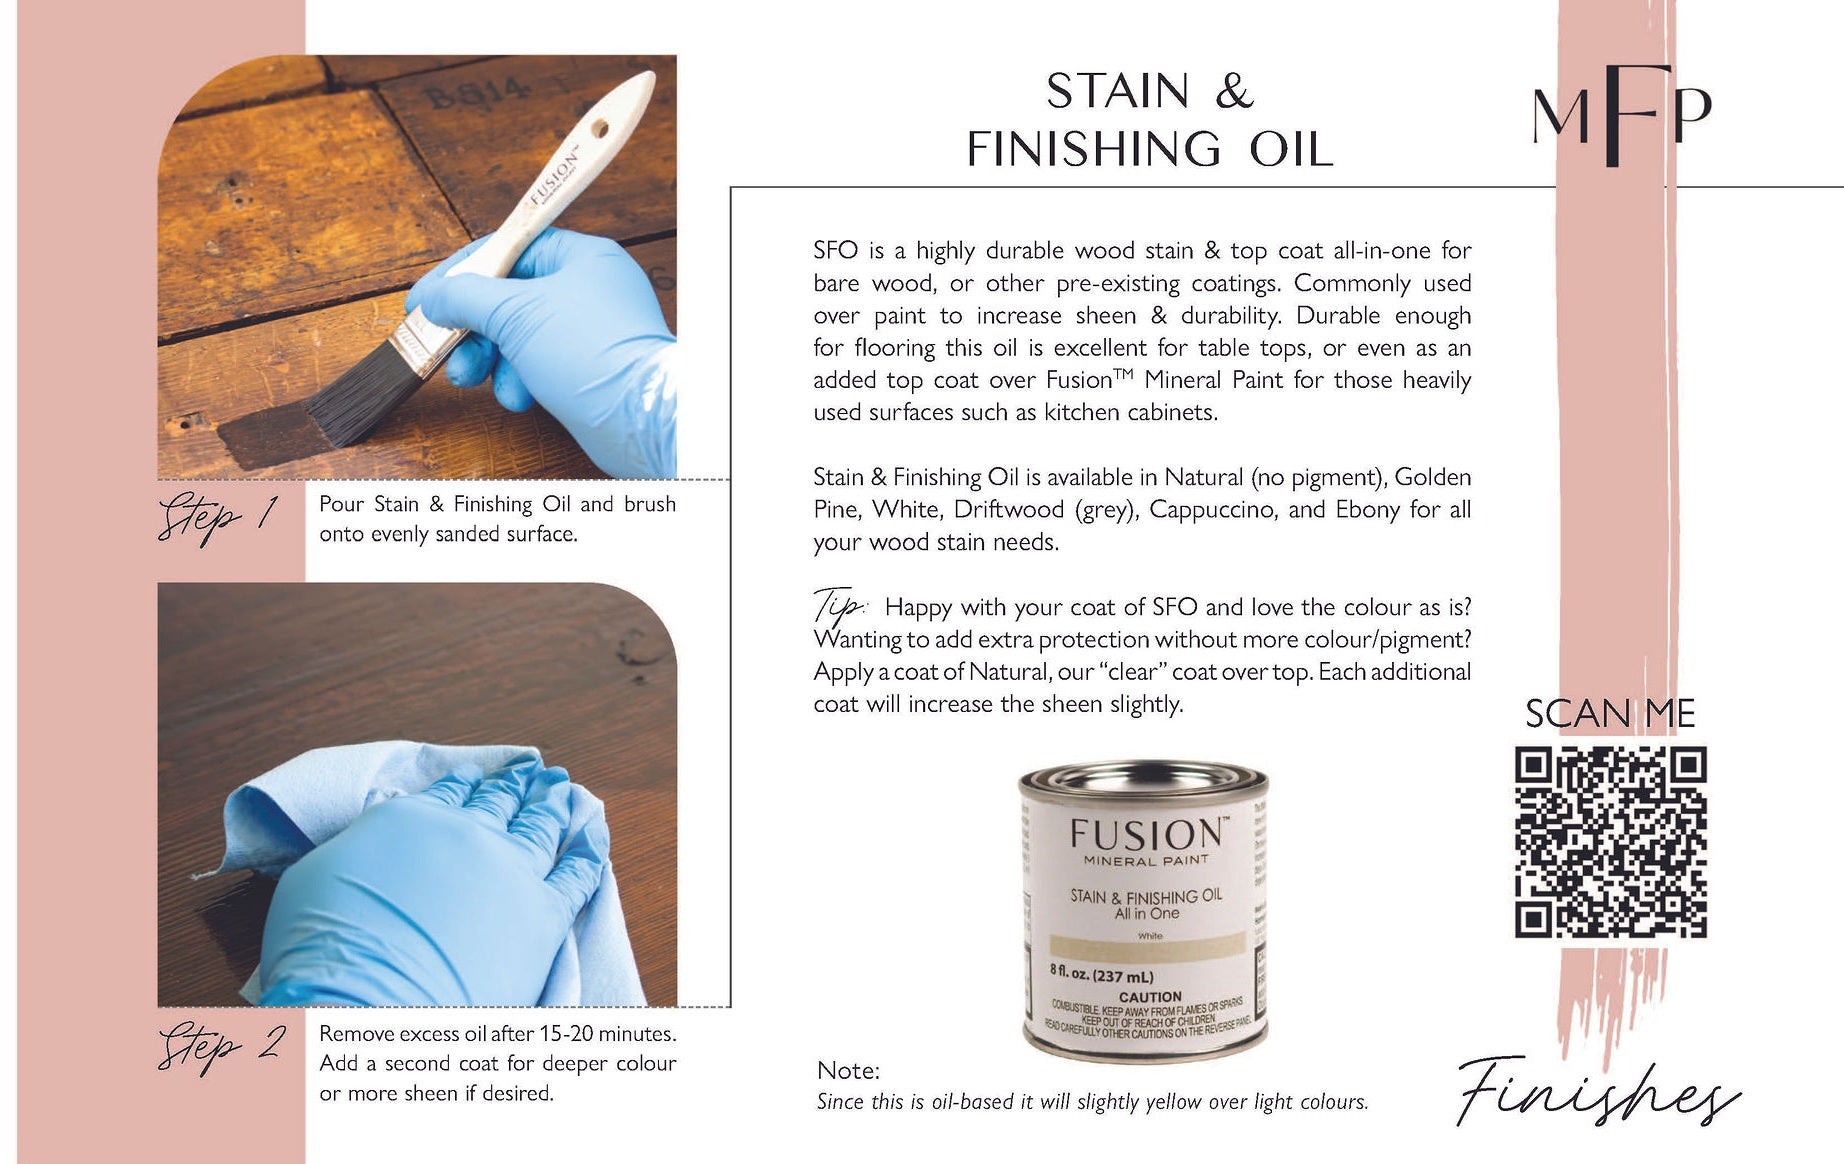 How to use fusion stain and finishing oil